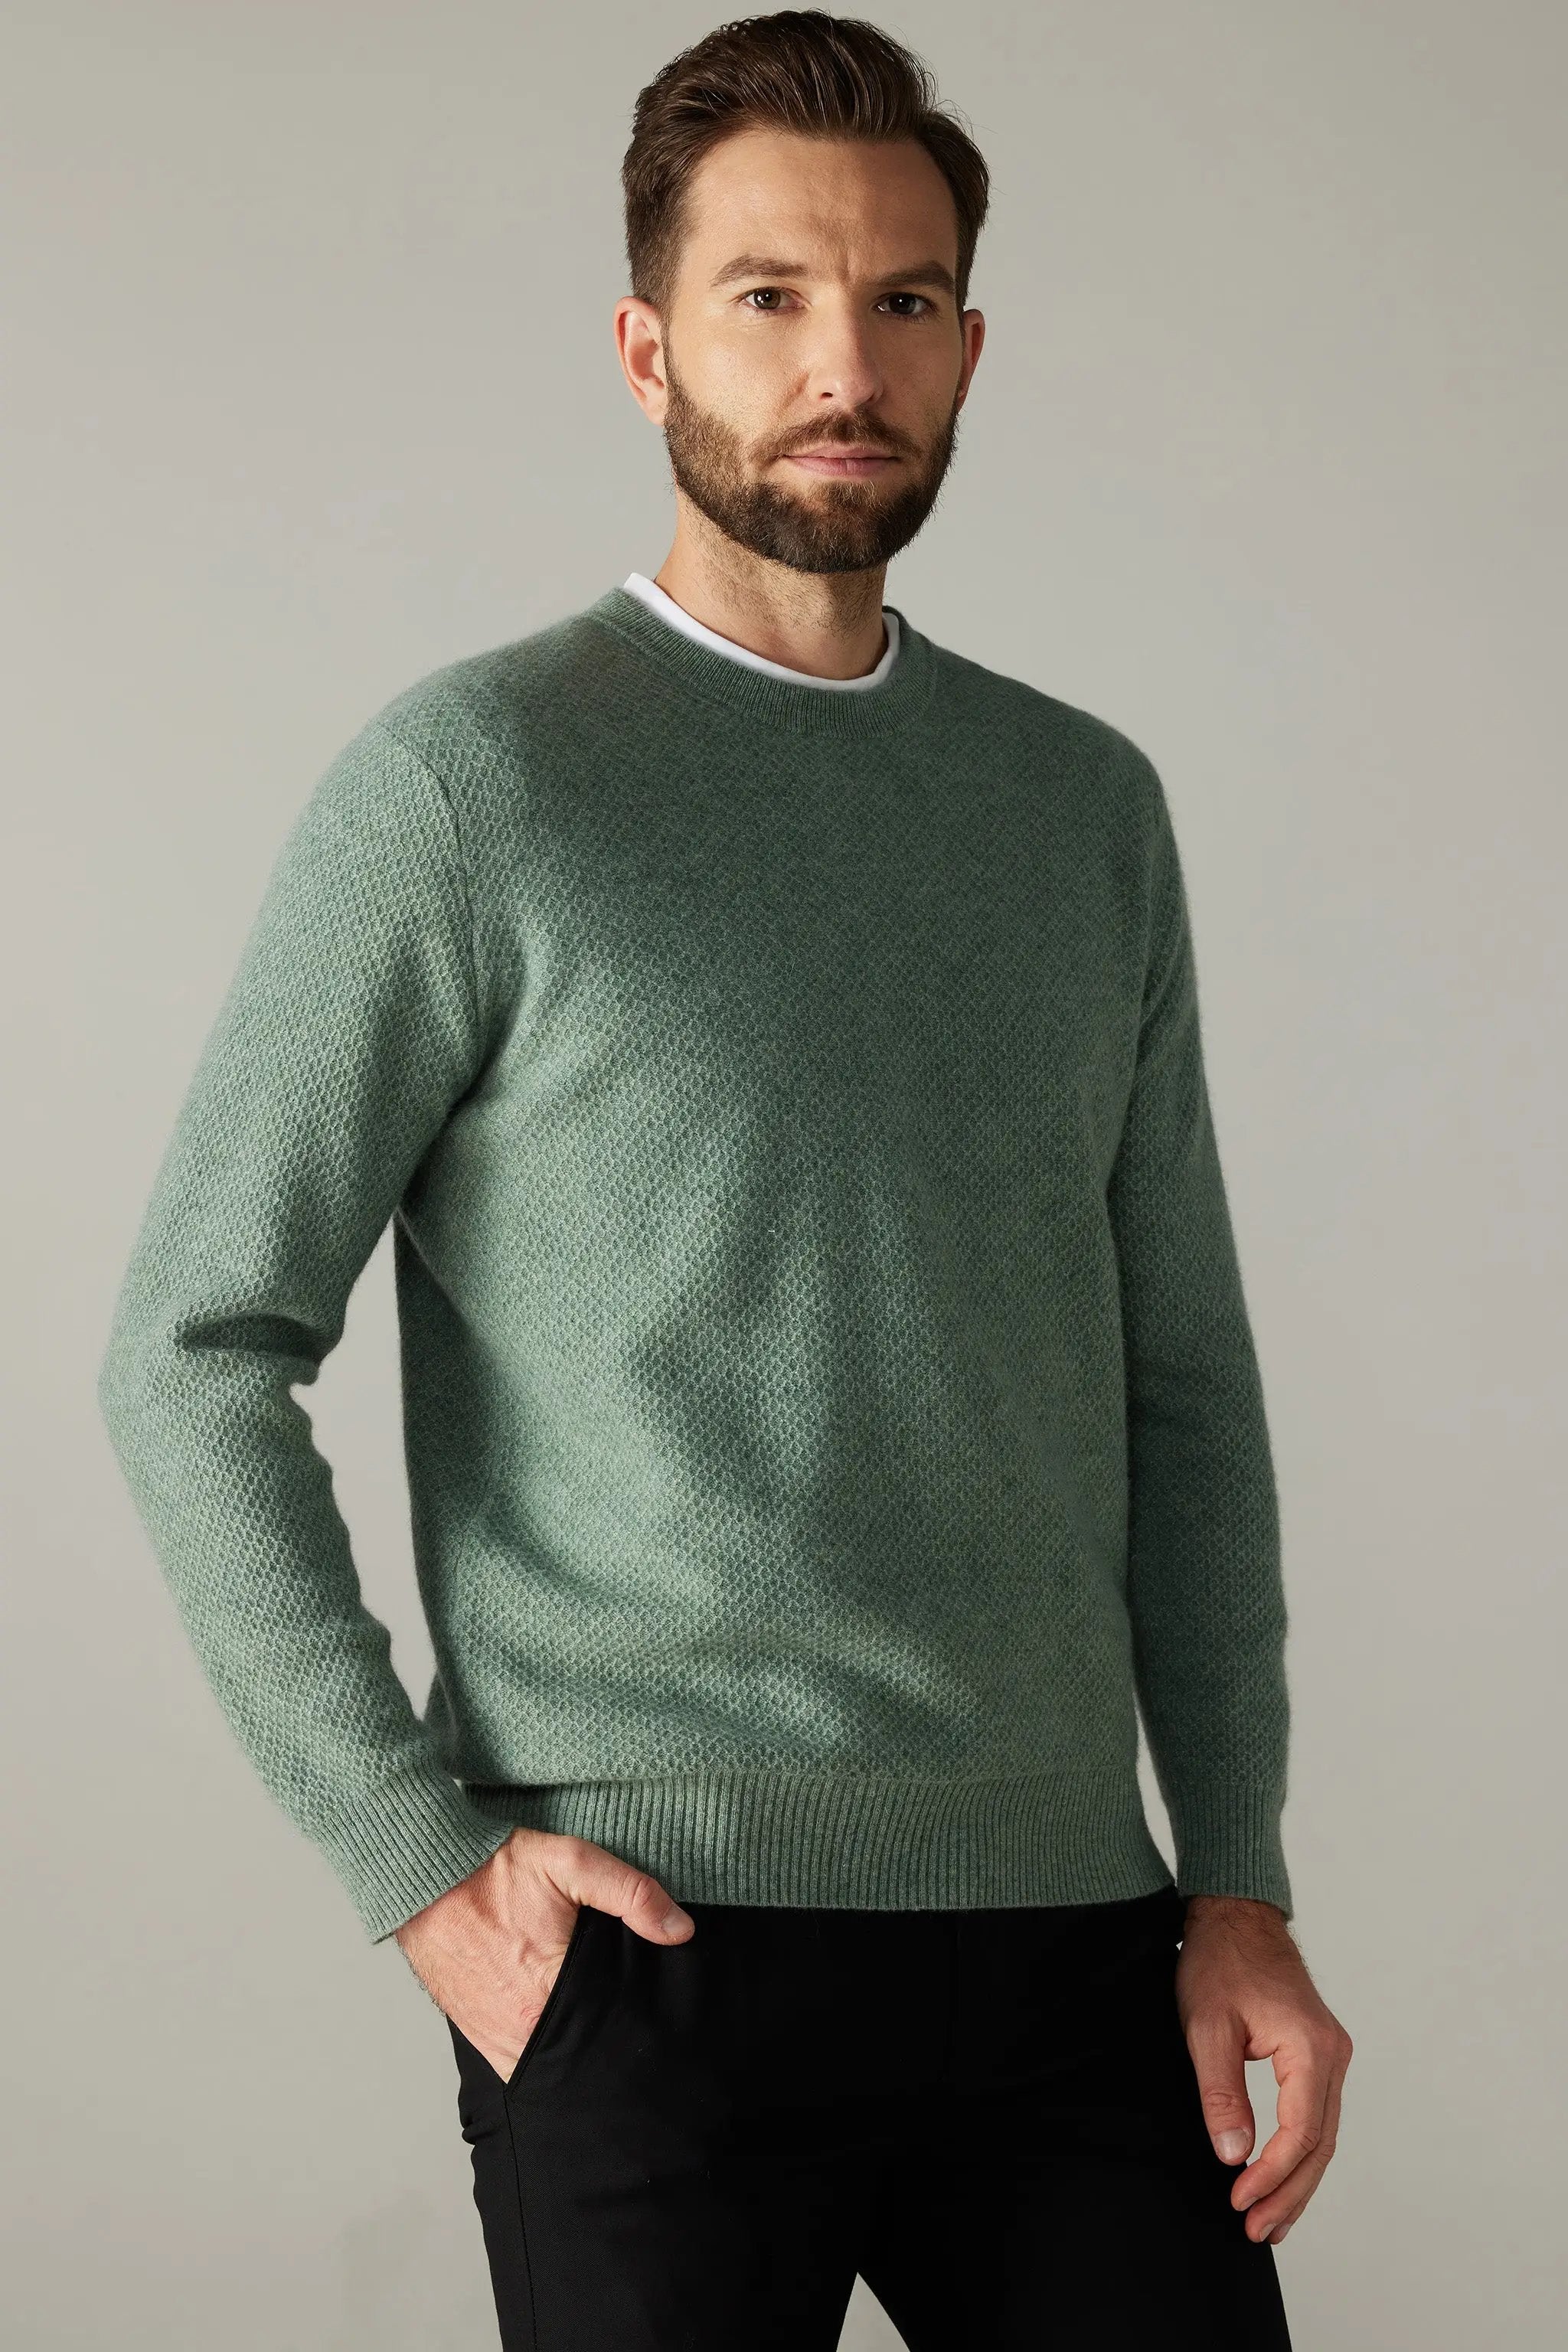 a man wearing a green sweater and black pants